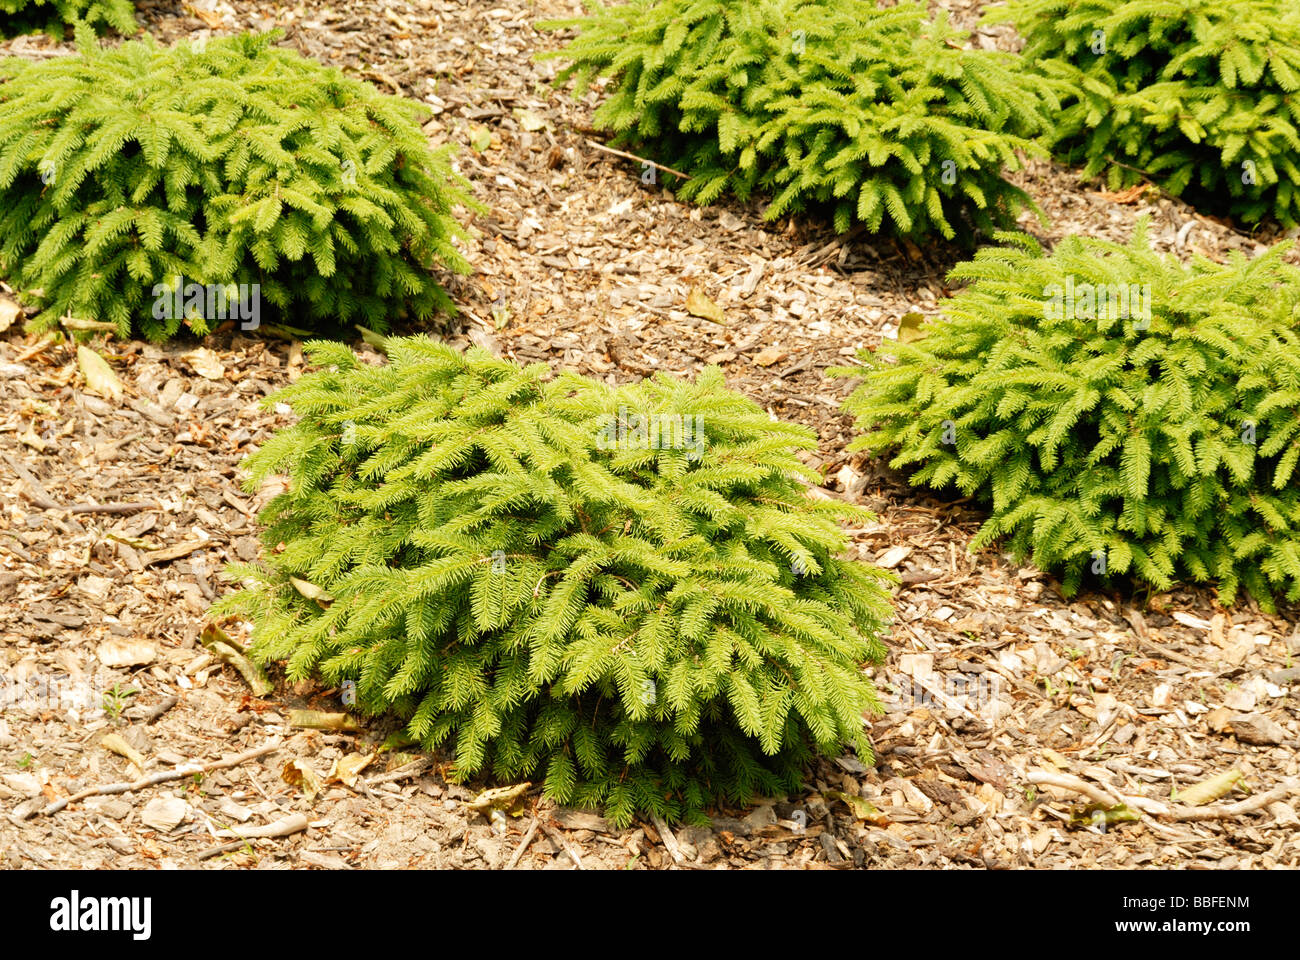 evergreen shrubs with a pine scent Stock Photo